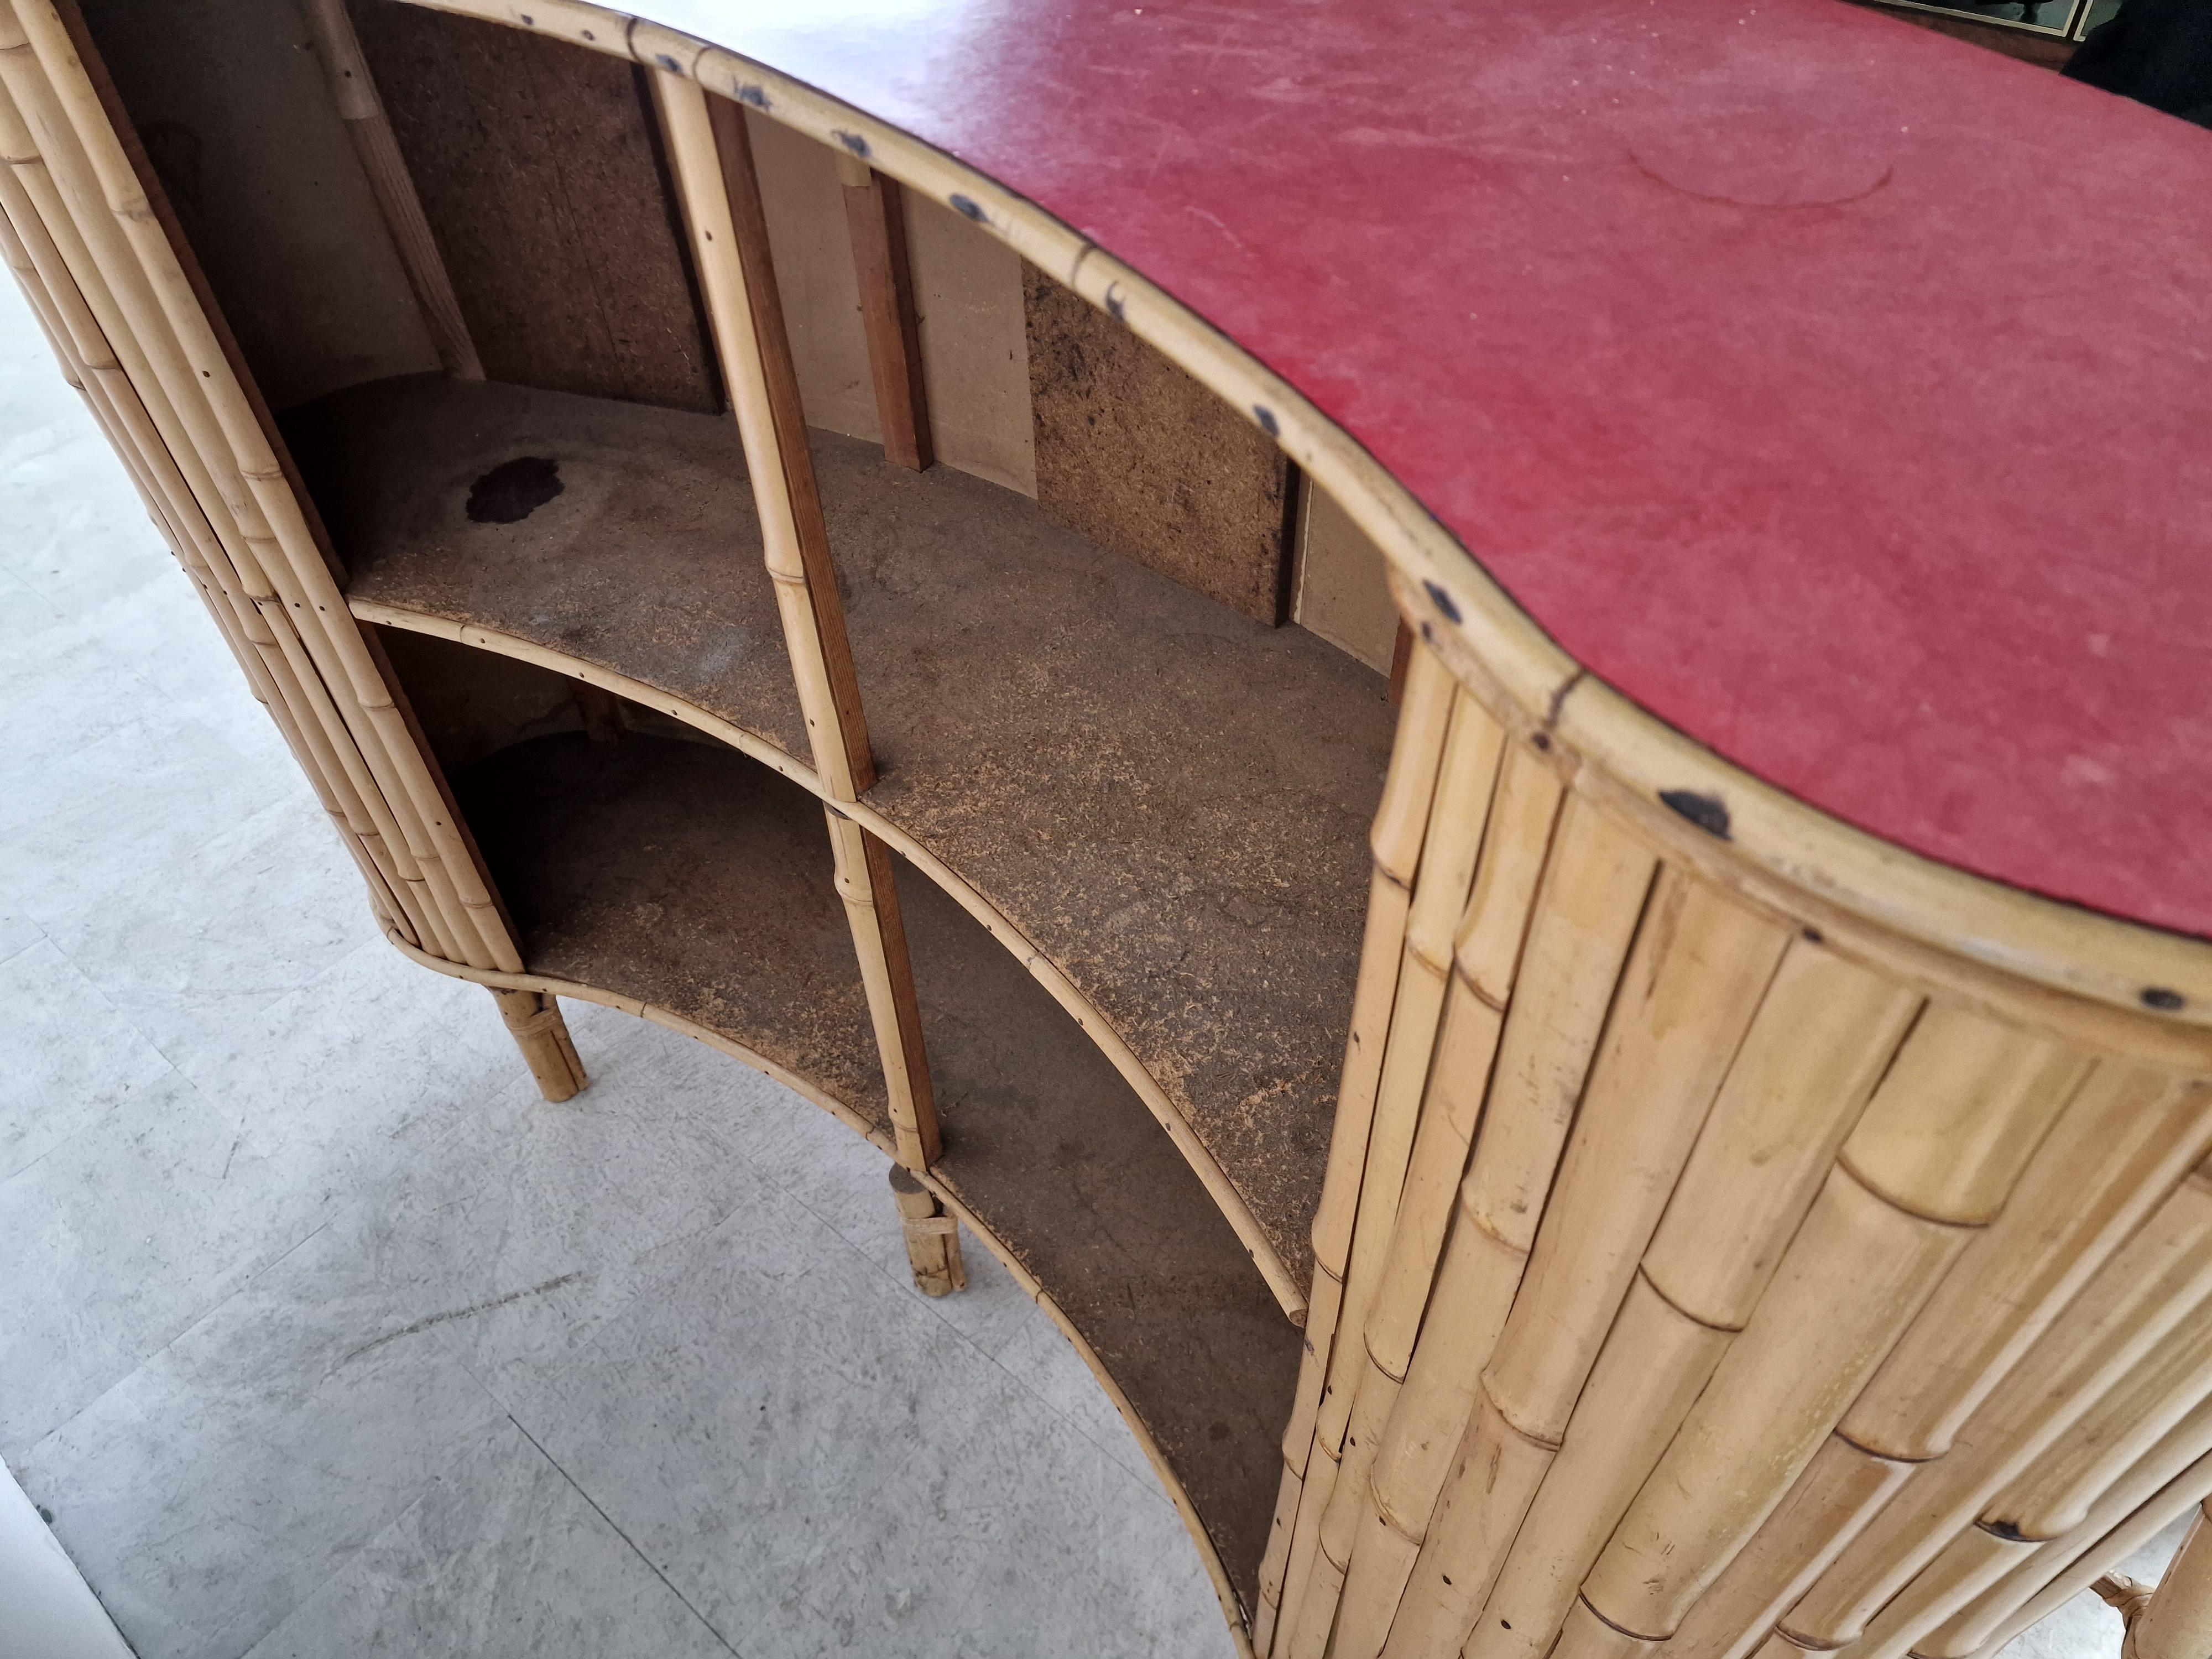 Lovely Tiki bar in bamboo for sale with a red formica table top and 4 matching stools. 

The bar also has ceramic tiles at the front.

Beautiful and well made example.

Very good condition.

1960s - France

Dimensions:
Height: